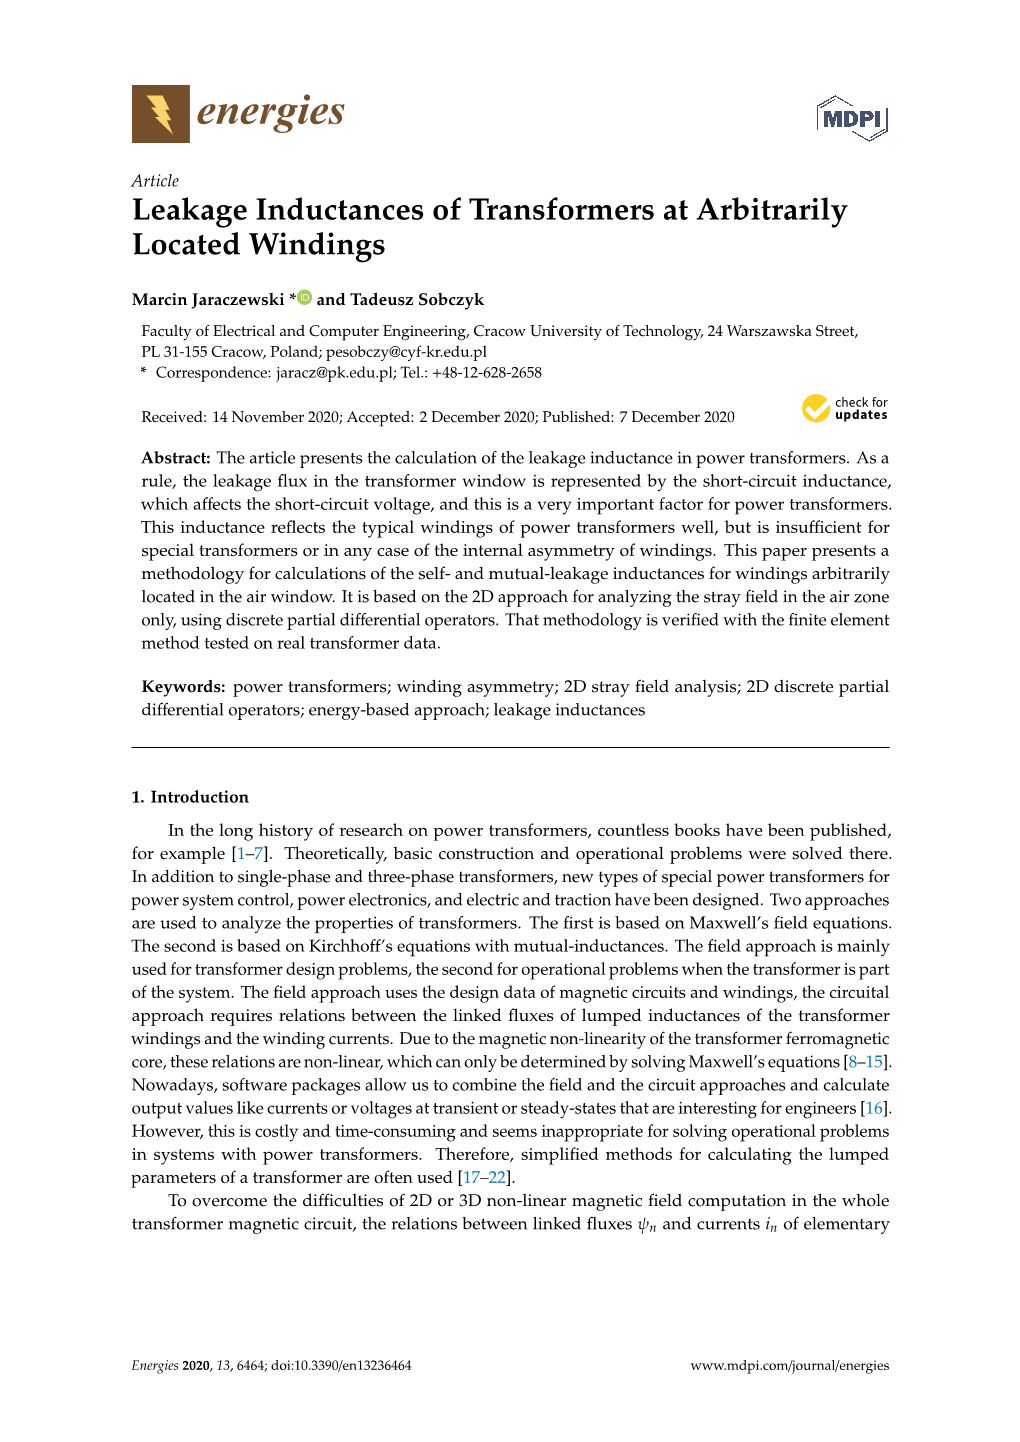 Leakage Inductances of Transformers at Arbitrarily Located Windings